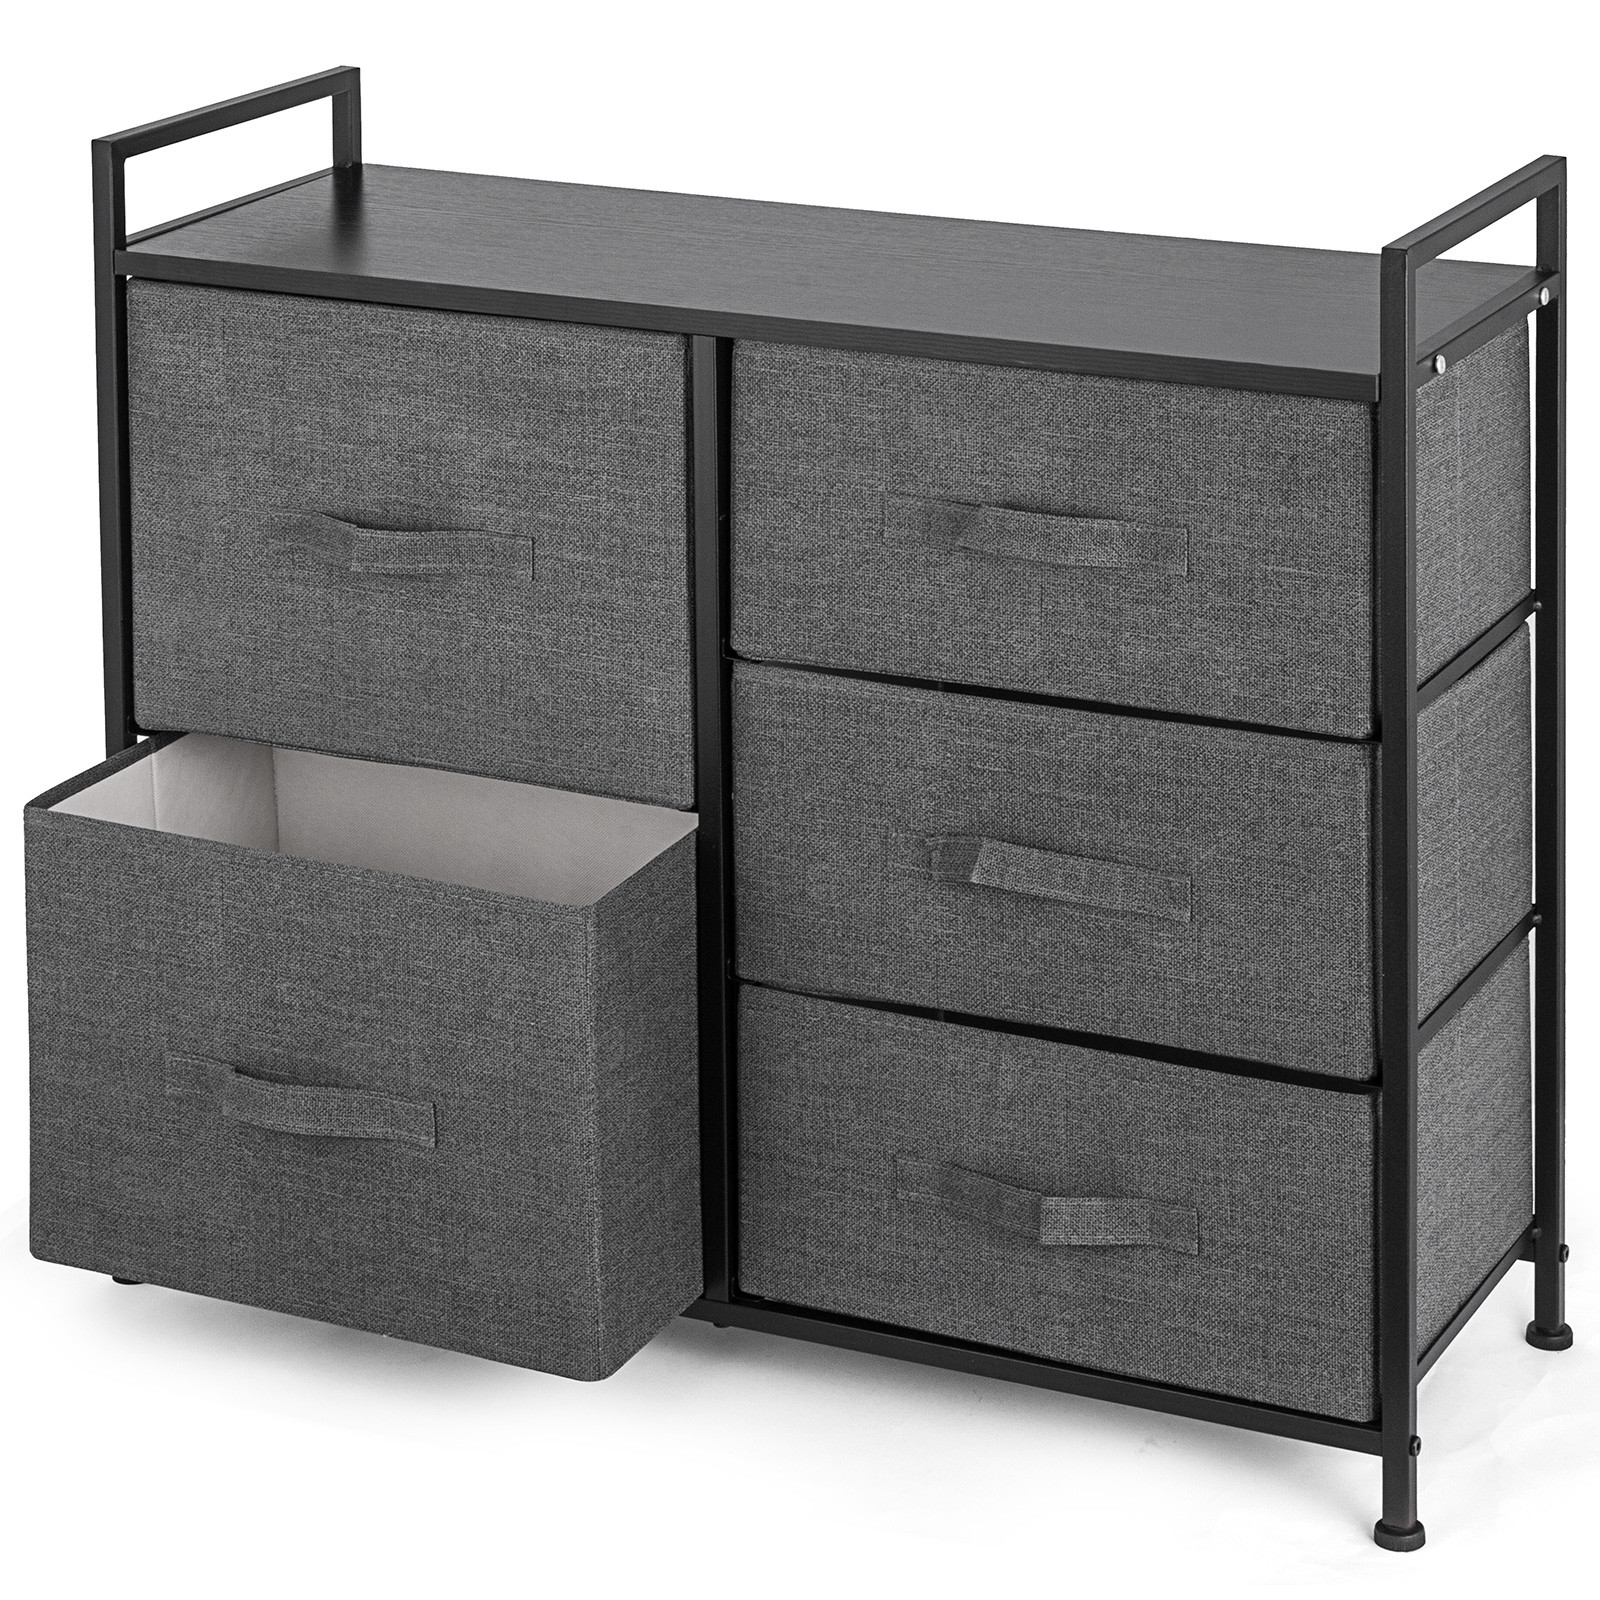 Dresser With Fabric Drawers Amazon Com Songmics 4 Tier Wide Drawer